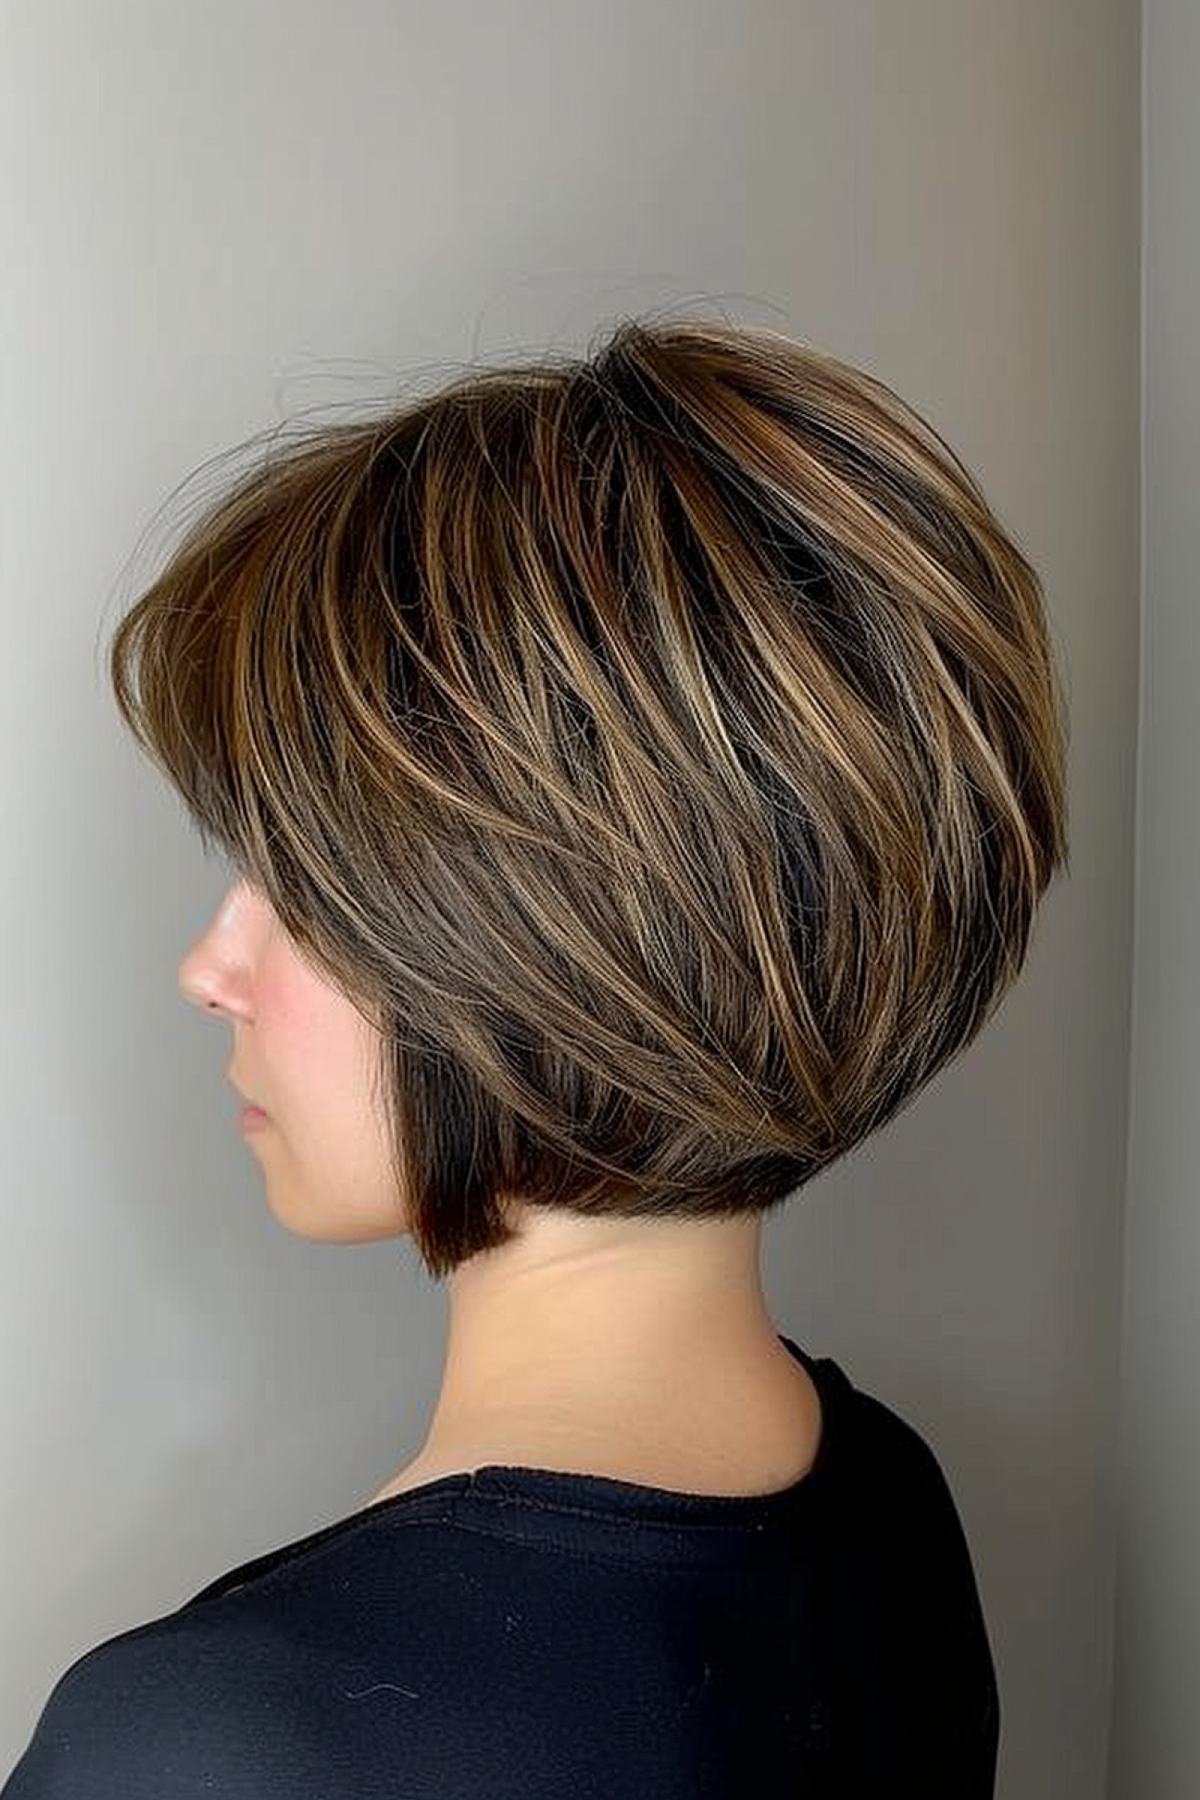 Short stacked bob haircut with precision tapering and face-framing layers